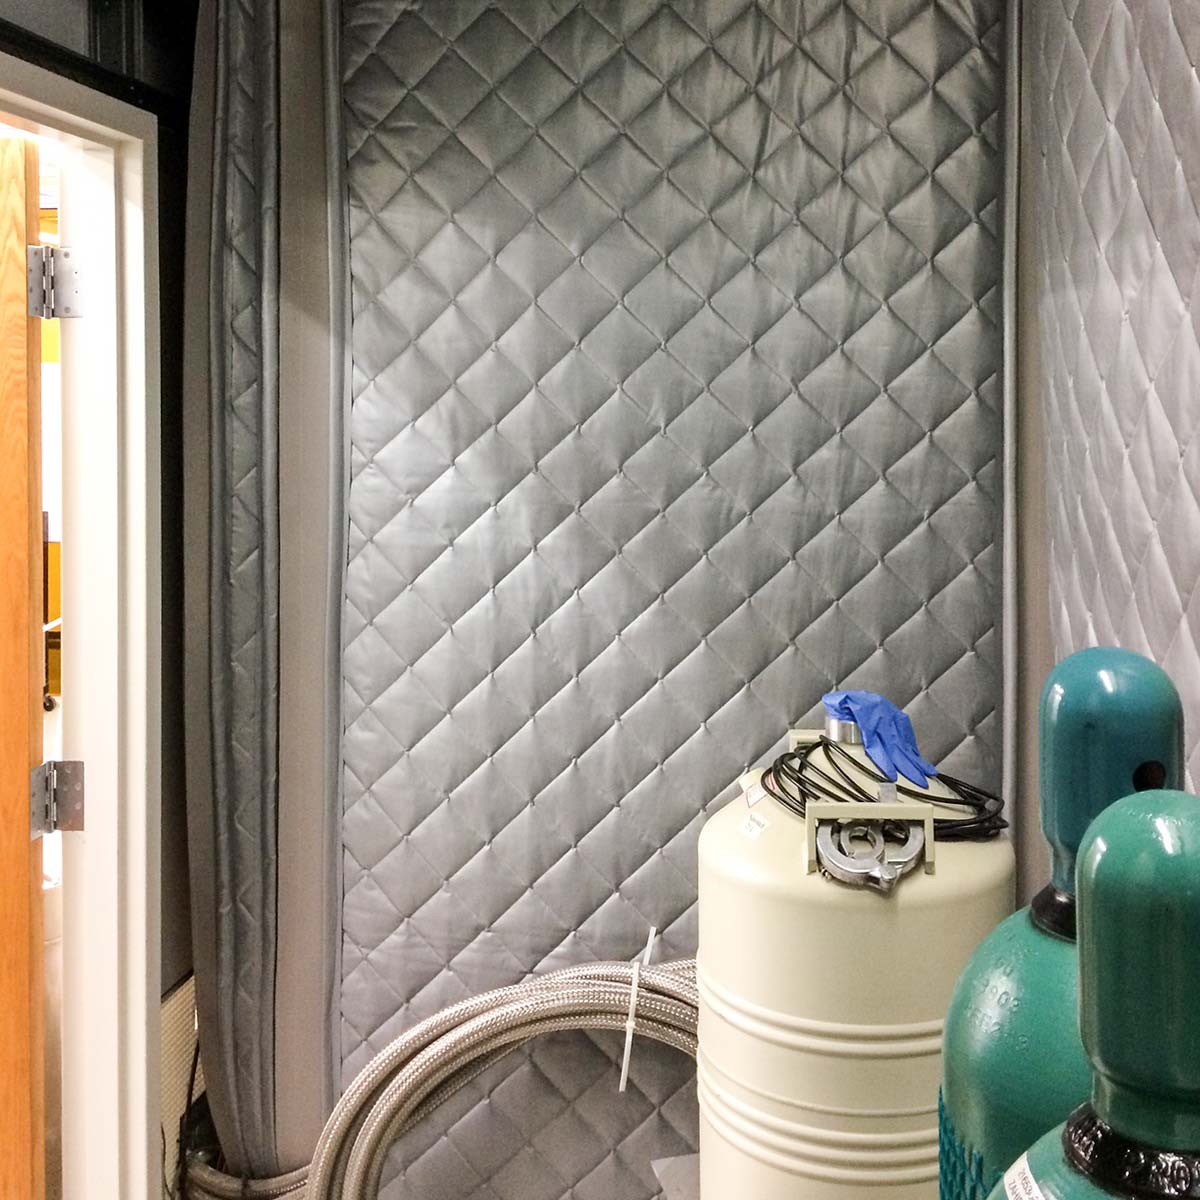 Using Soundproof Blankets to Reduce Noise - Residential Acoustics®